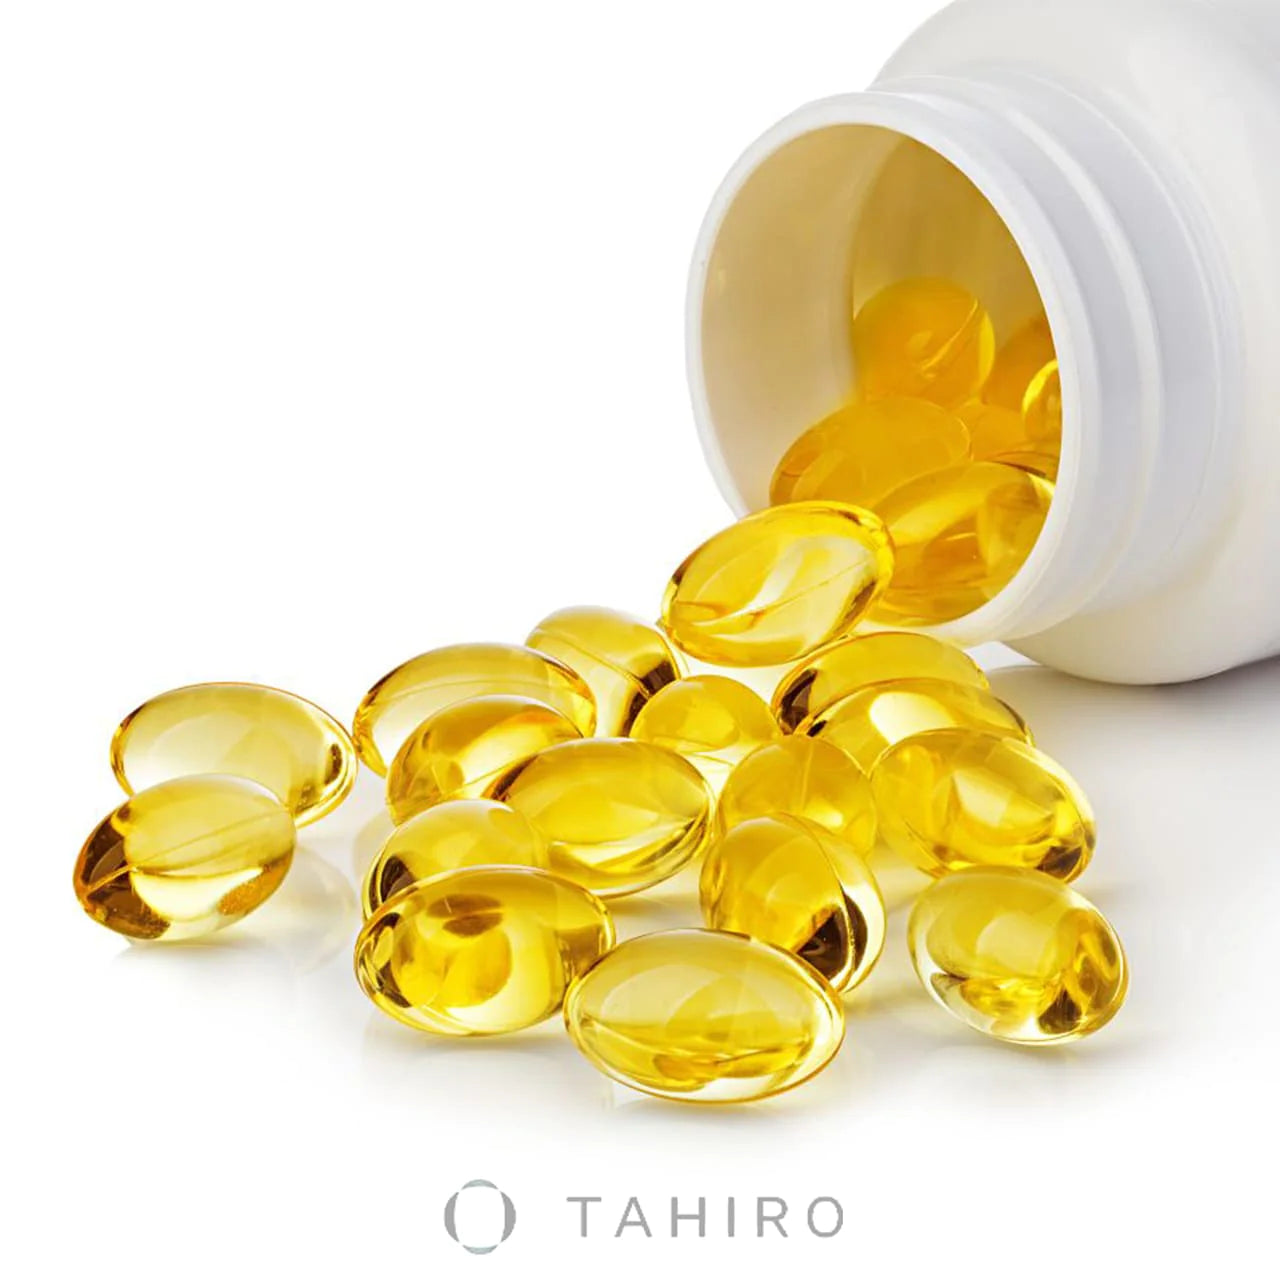 How Fast Can Omega-3 Transform Your Health?